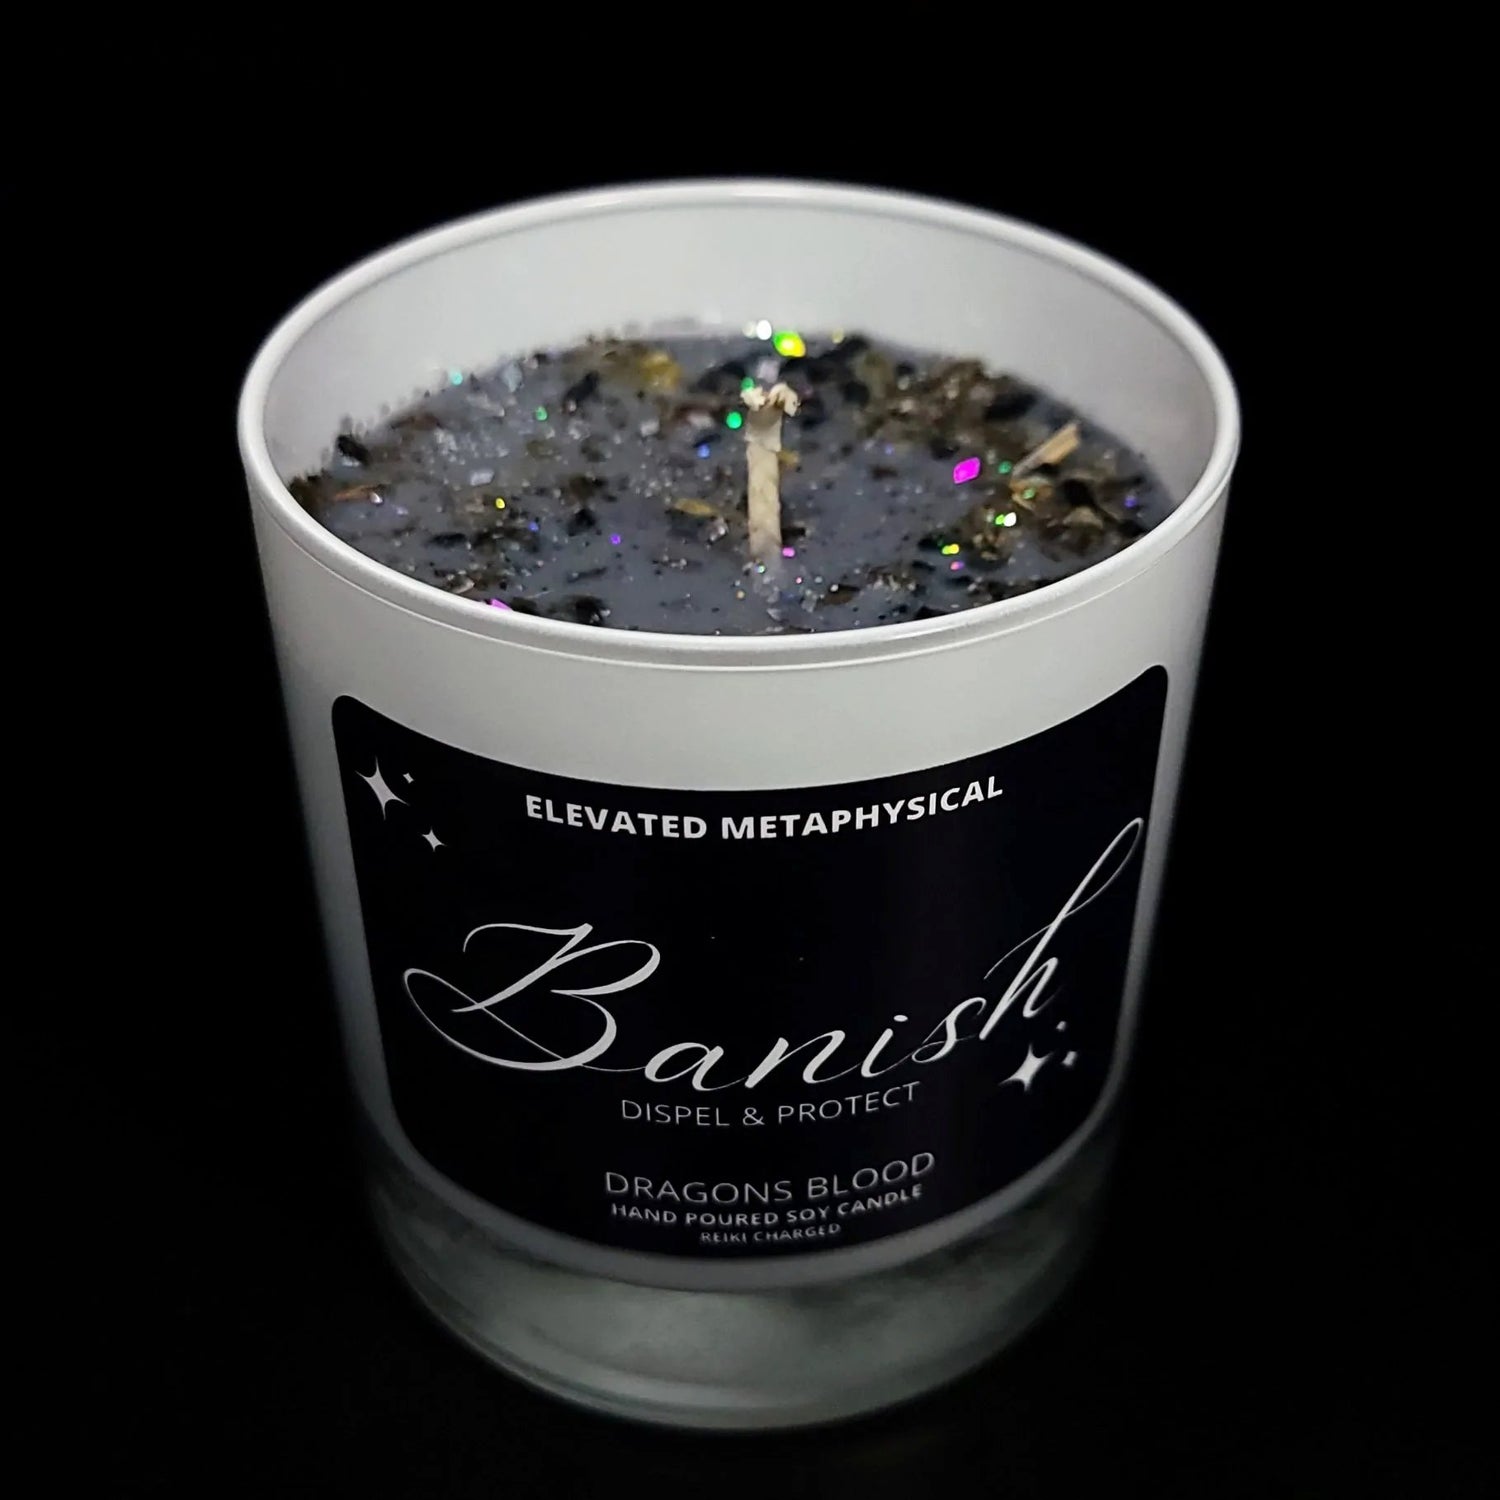 Banish Crystal Candle Dragons Blood Scented 11oz 310g - Elevated Metaphysical